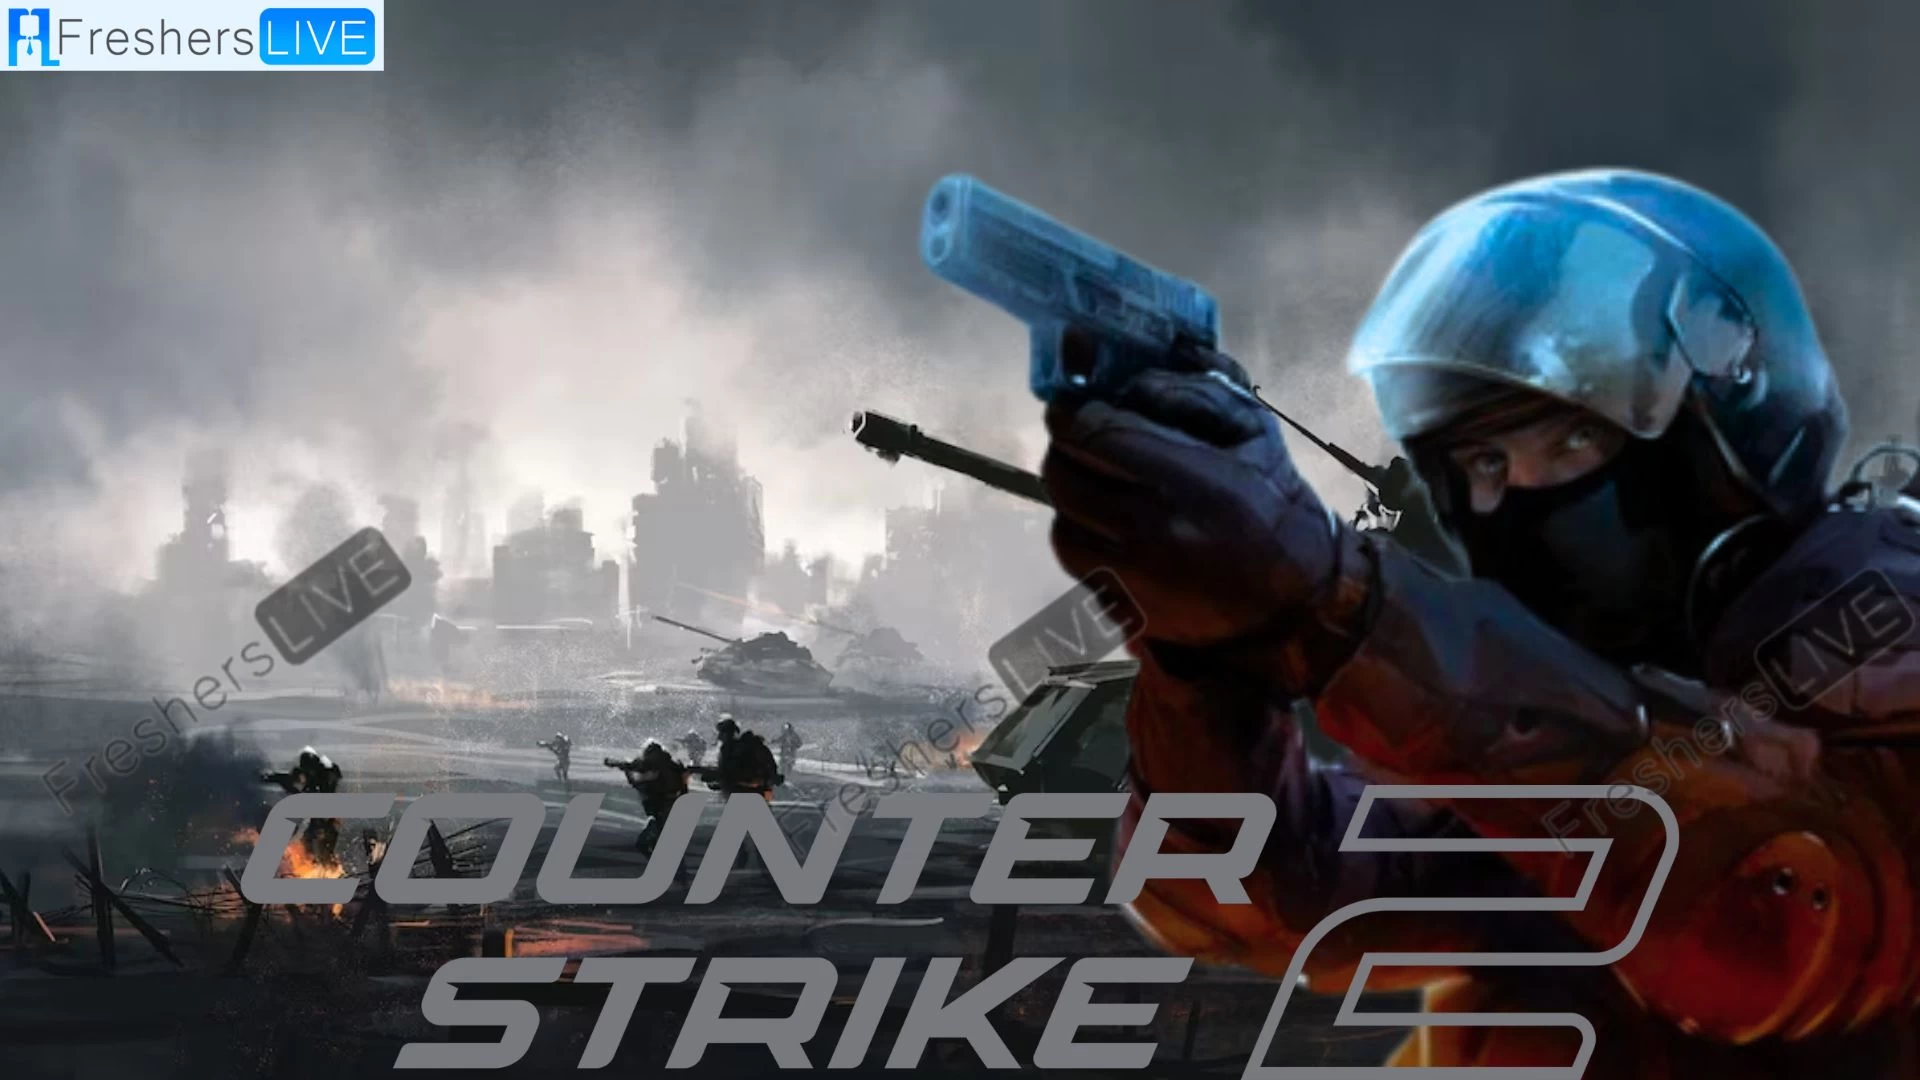 How to Optimize Your Pc For Counter-Strike 2? A Complete Guide